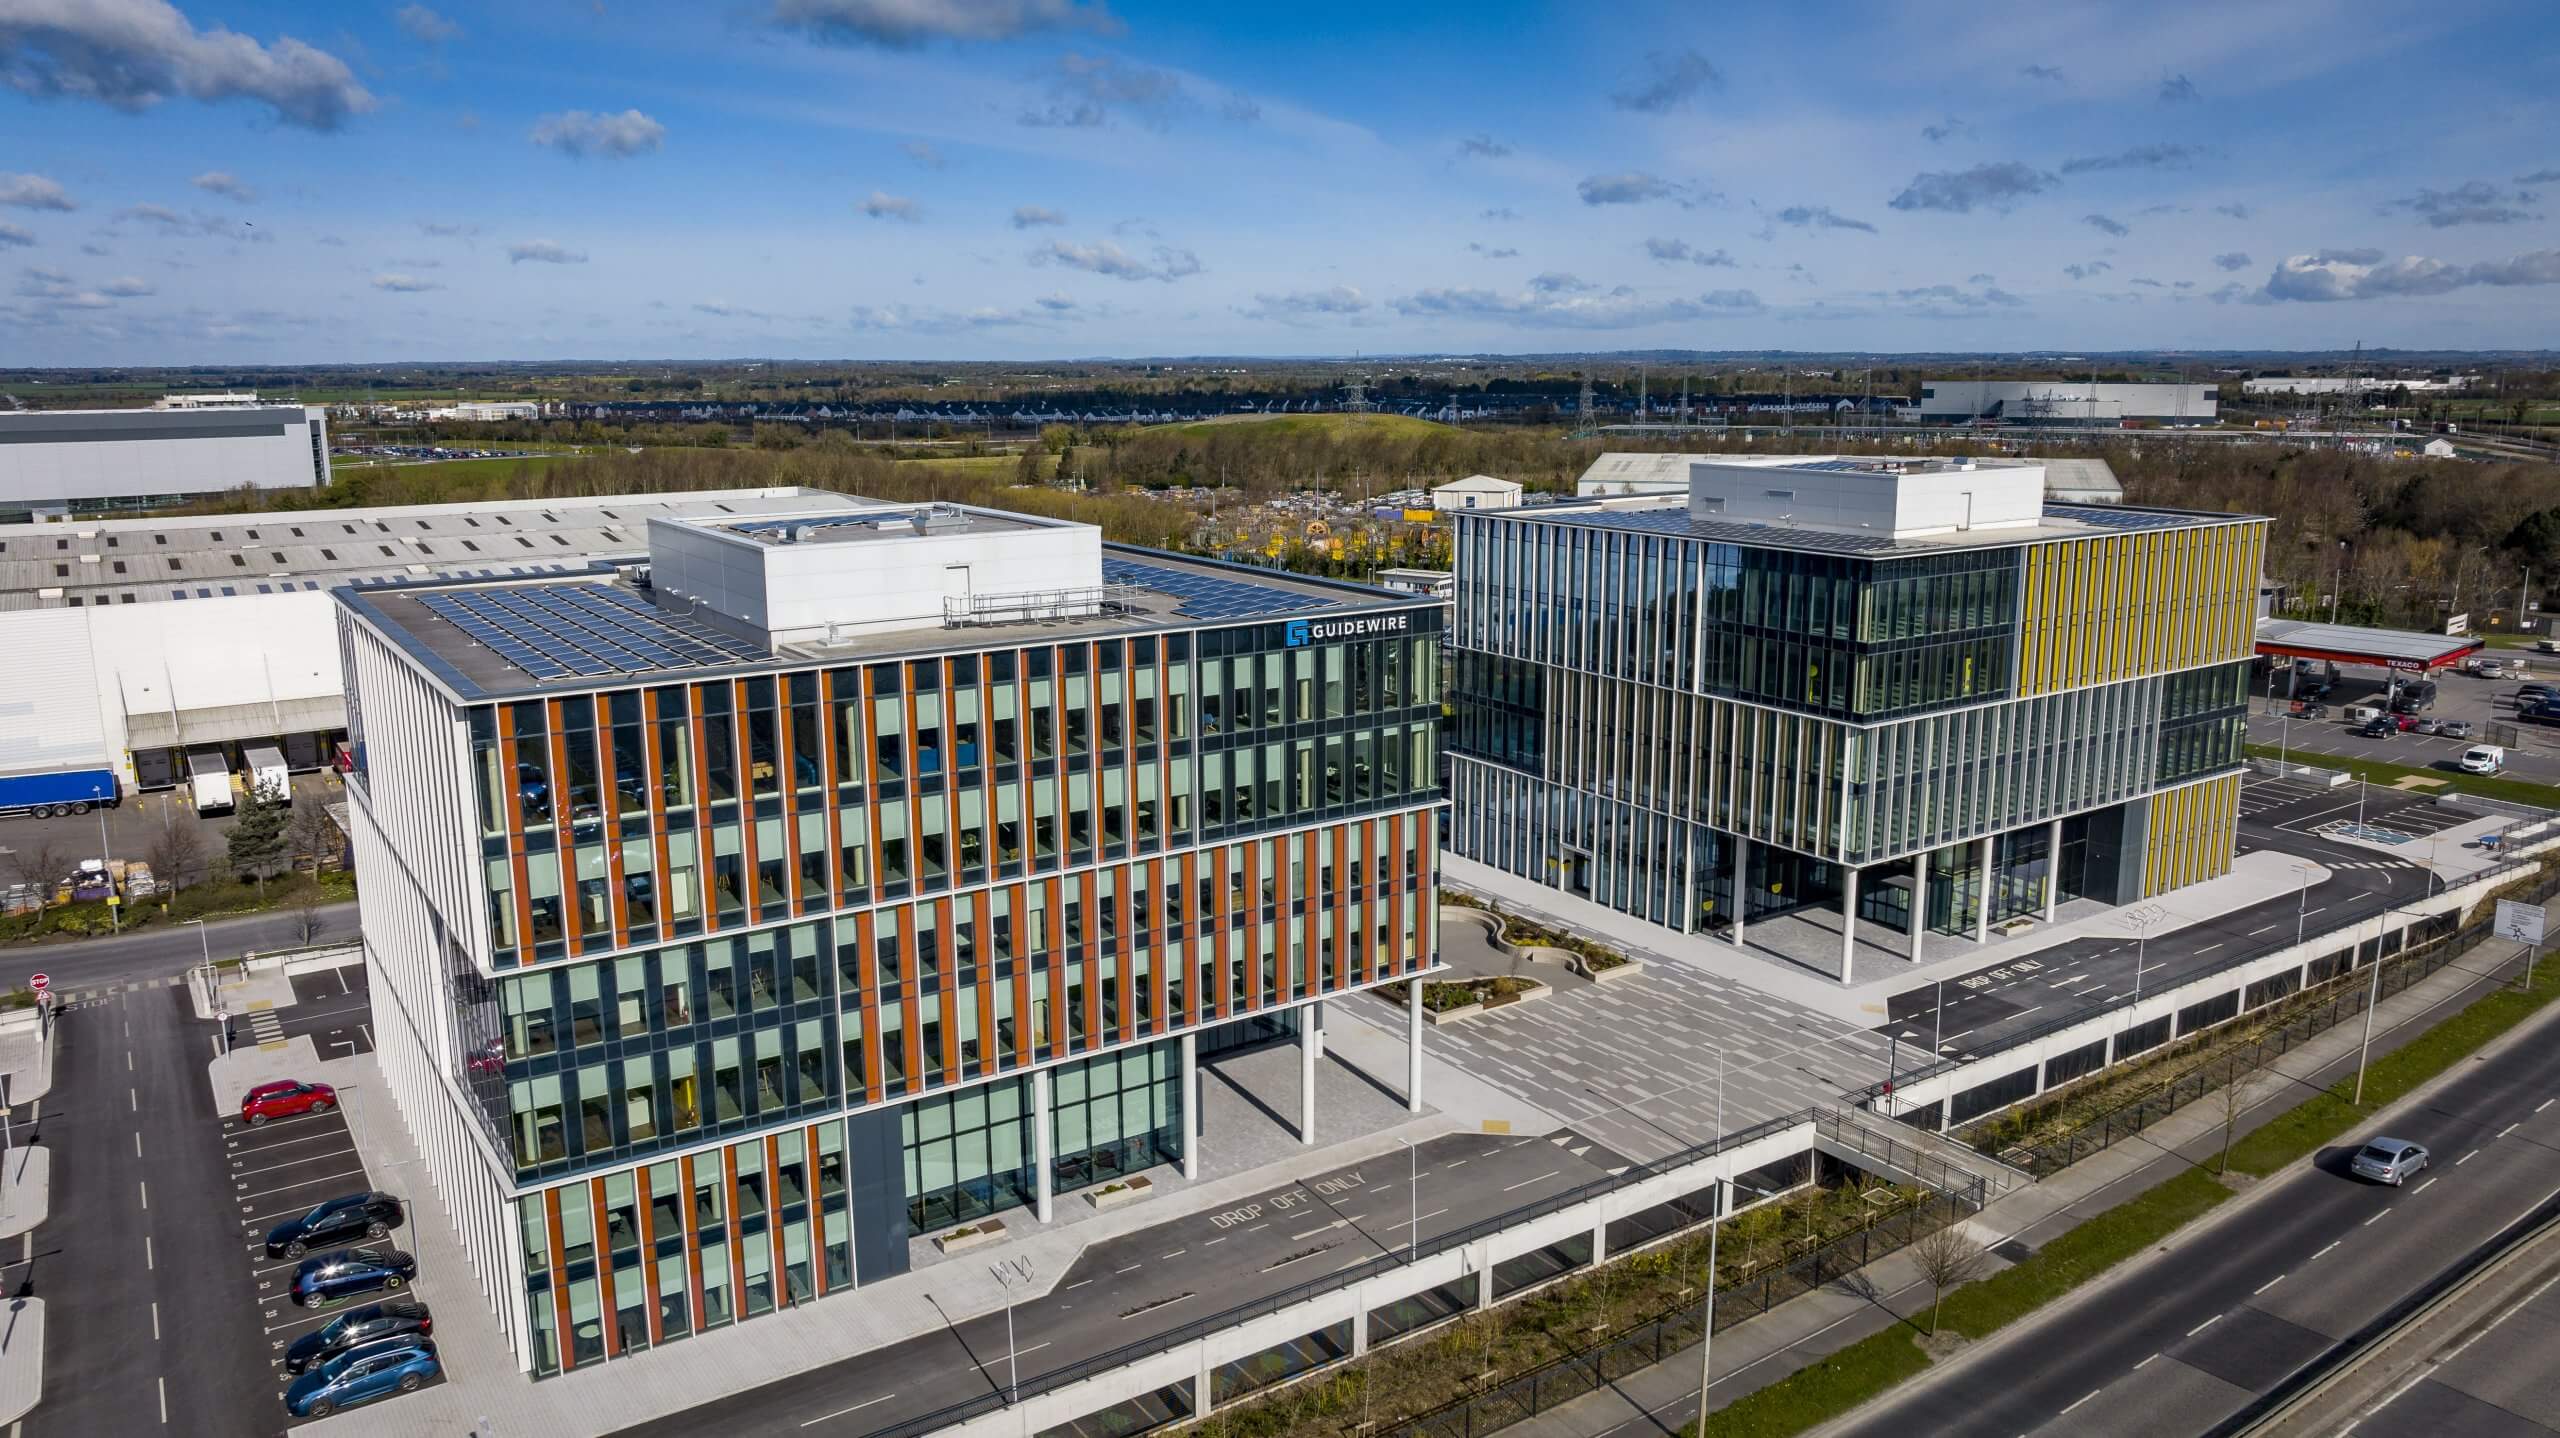 Stemple Exchange in Blanchardstown Corporate Park, comprises two new buildings with a BER A-3 rating and ample electric vehicle (EV) charging points.